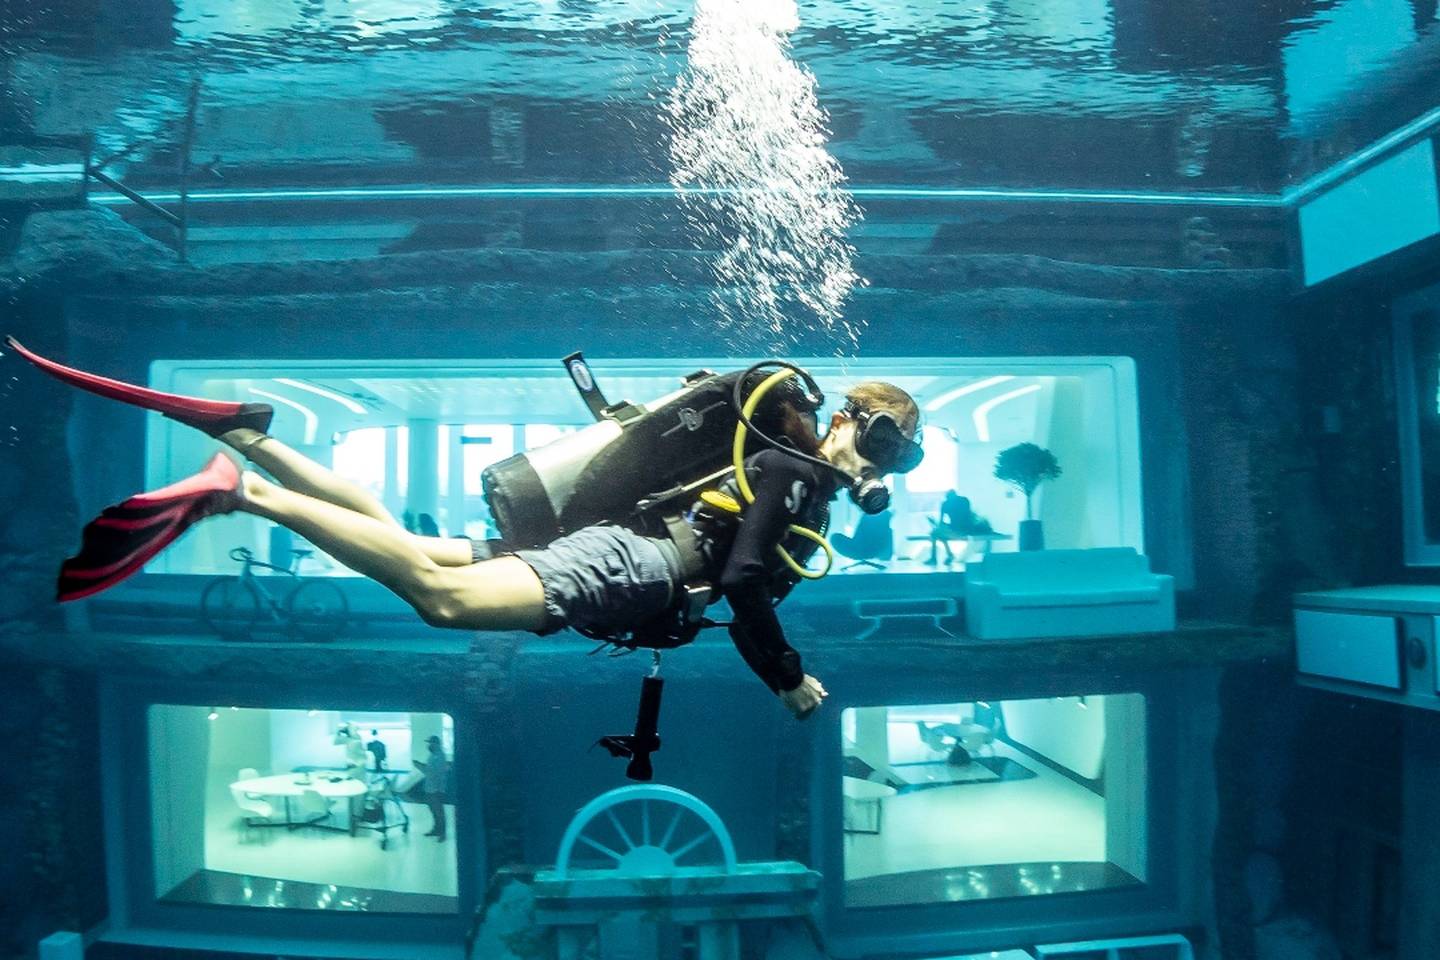 Could Dubai Be the Site of an Underwater Tennis Court?